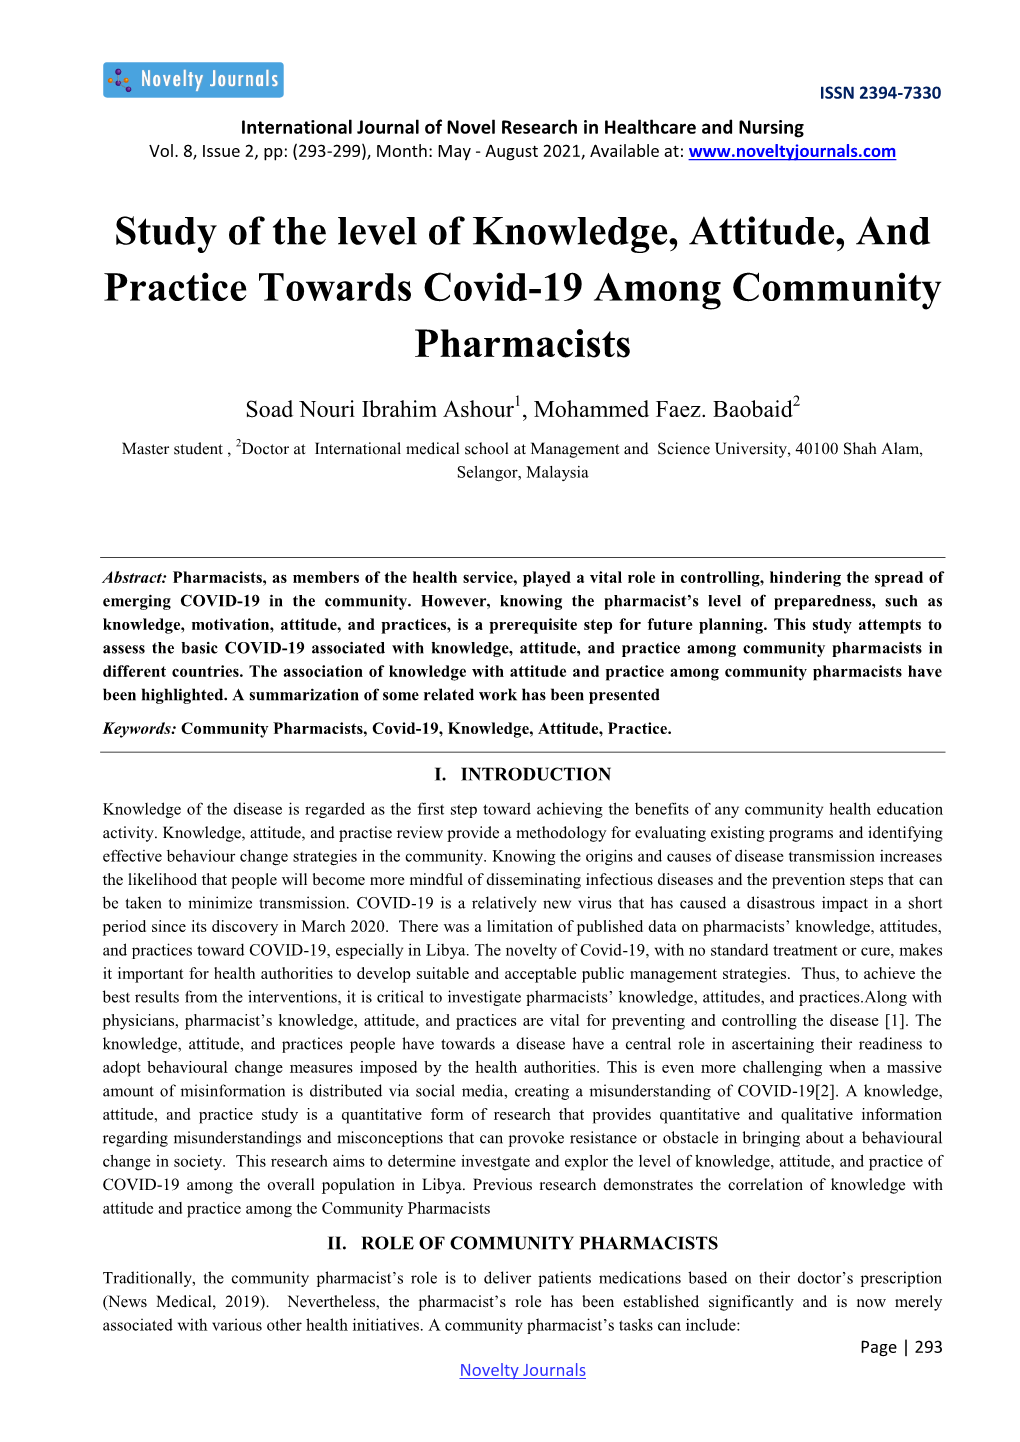 Study of the Level of Knowledge, Attitude, and Practice Towards Covid-19 Among Community Pharmacists